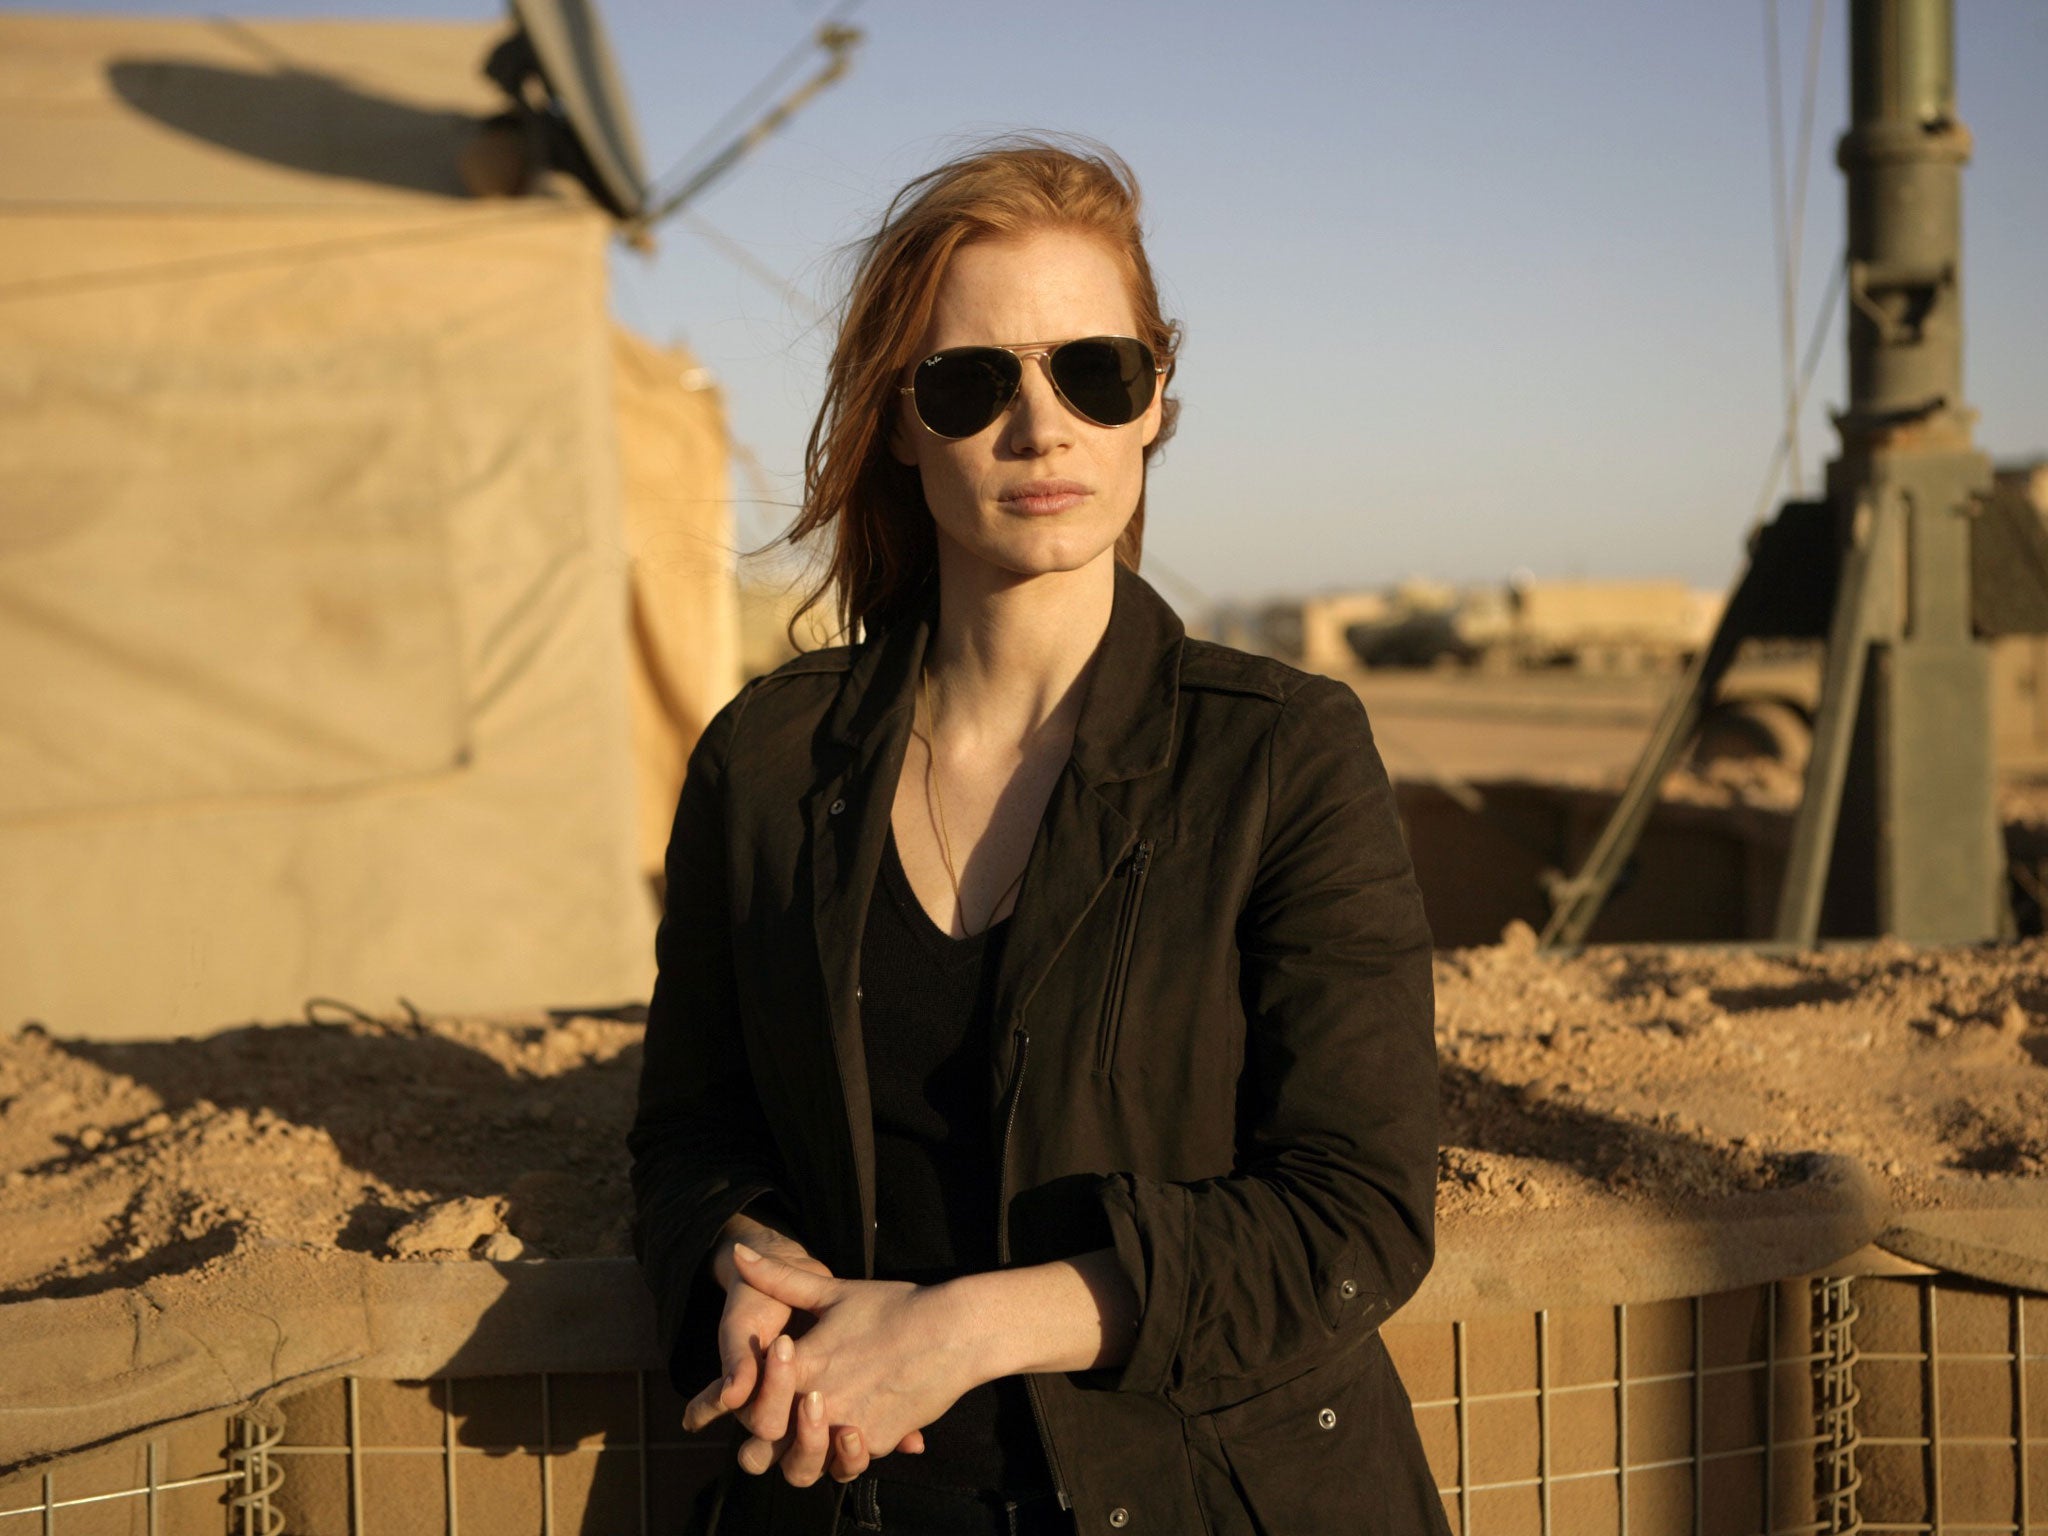 On the hunt: Jessica Chastain stars as CIA agent Maya in action thriller, Zero Dark Thirty